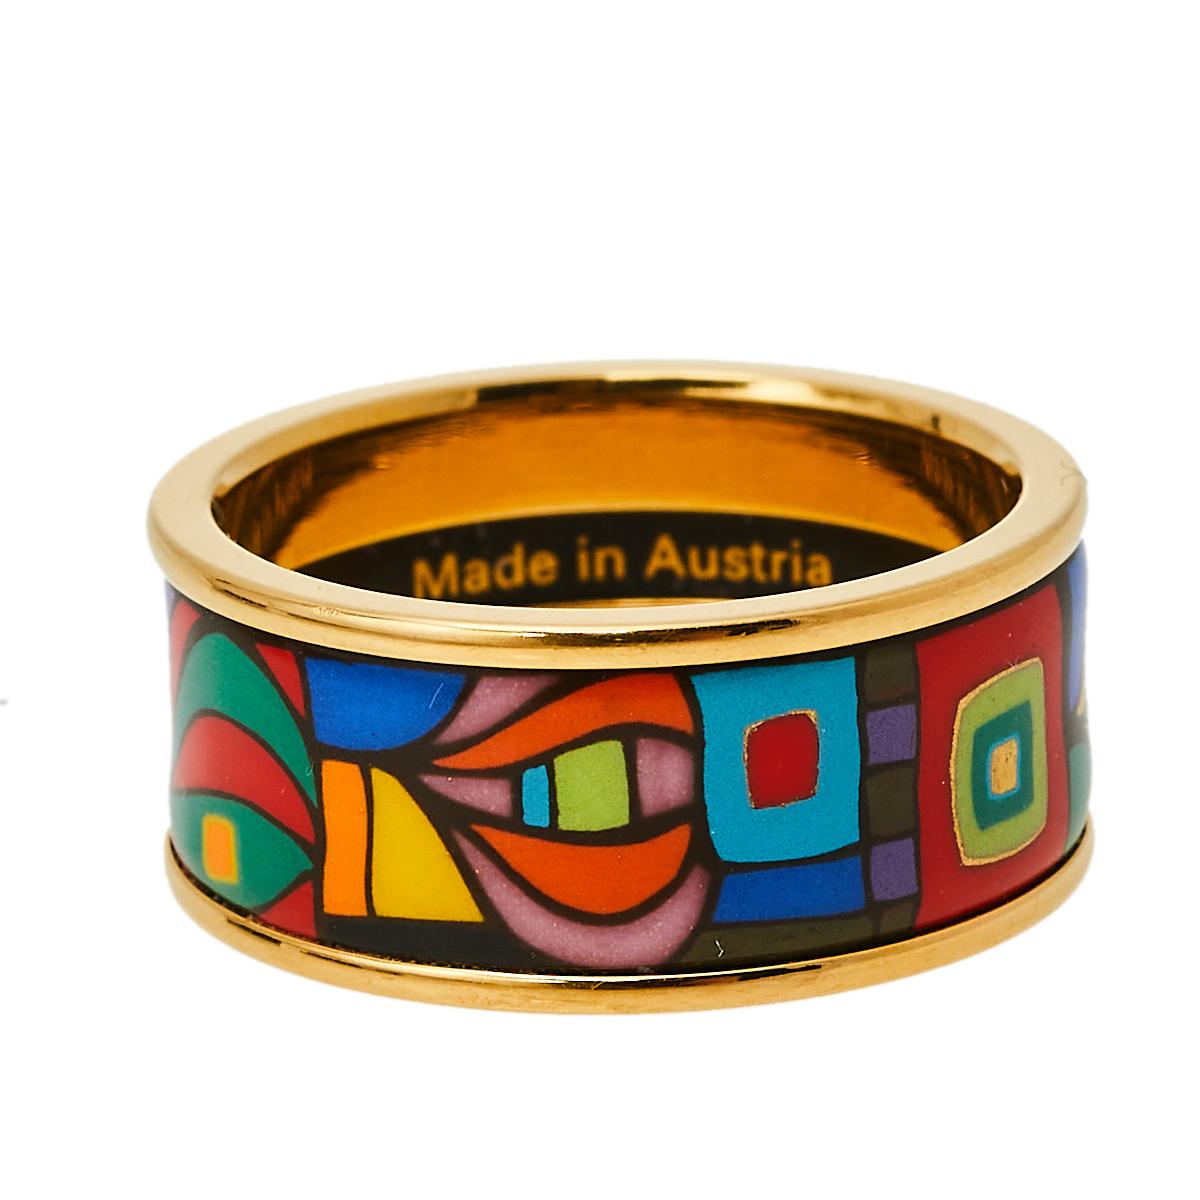 The renowned enamel jewelry manufacturer from Austria, Frey Wille brings to you this lively ring. This band ring features vivid colors in different patterns, all designed using fire enamel. Style this band ring with a Frey Wille bracelet to complete